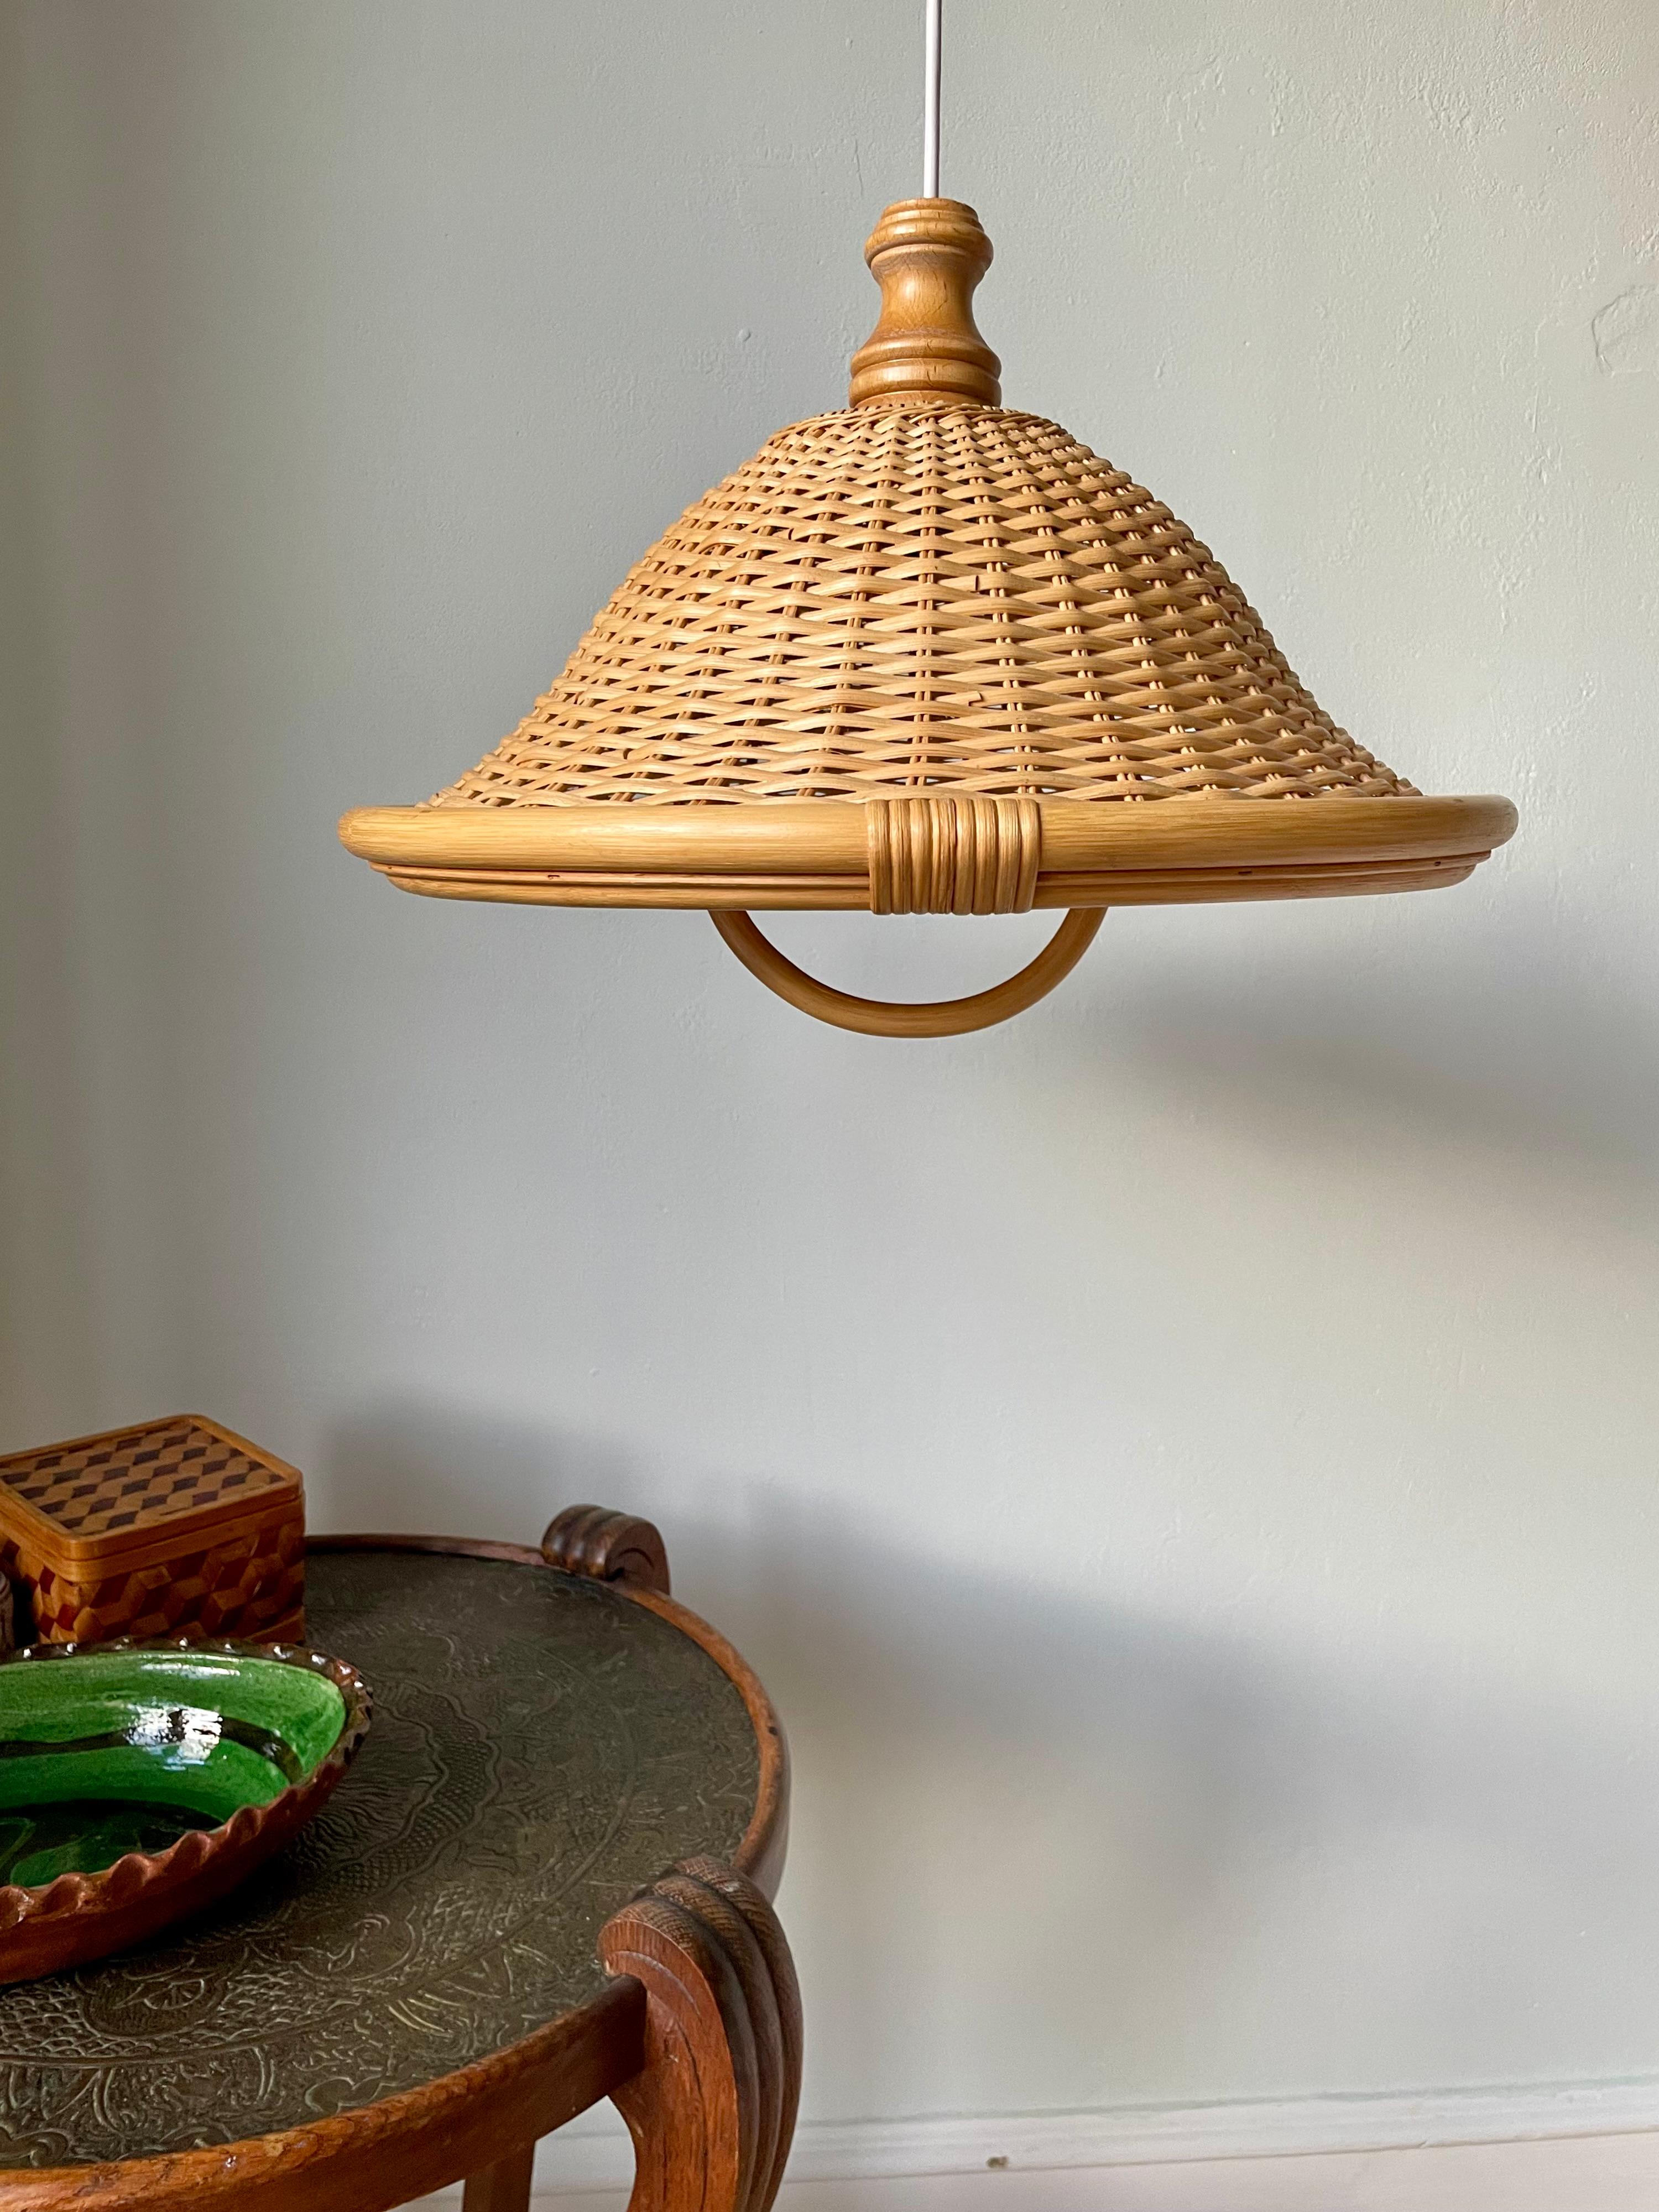 Scandinavian organic modern braided bamboo pendant with round decorative handle making it possible to wire it with an elastic suspension cord and use the handle to pull it up and down. Loosely placed pine wood top and round bamboo edges. Rewired and